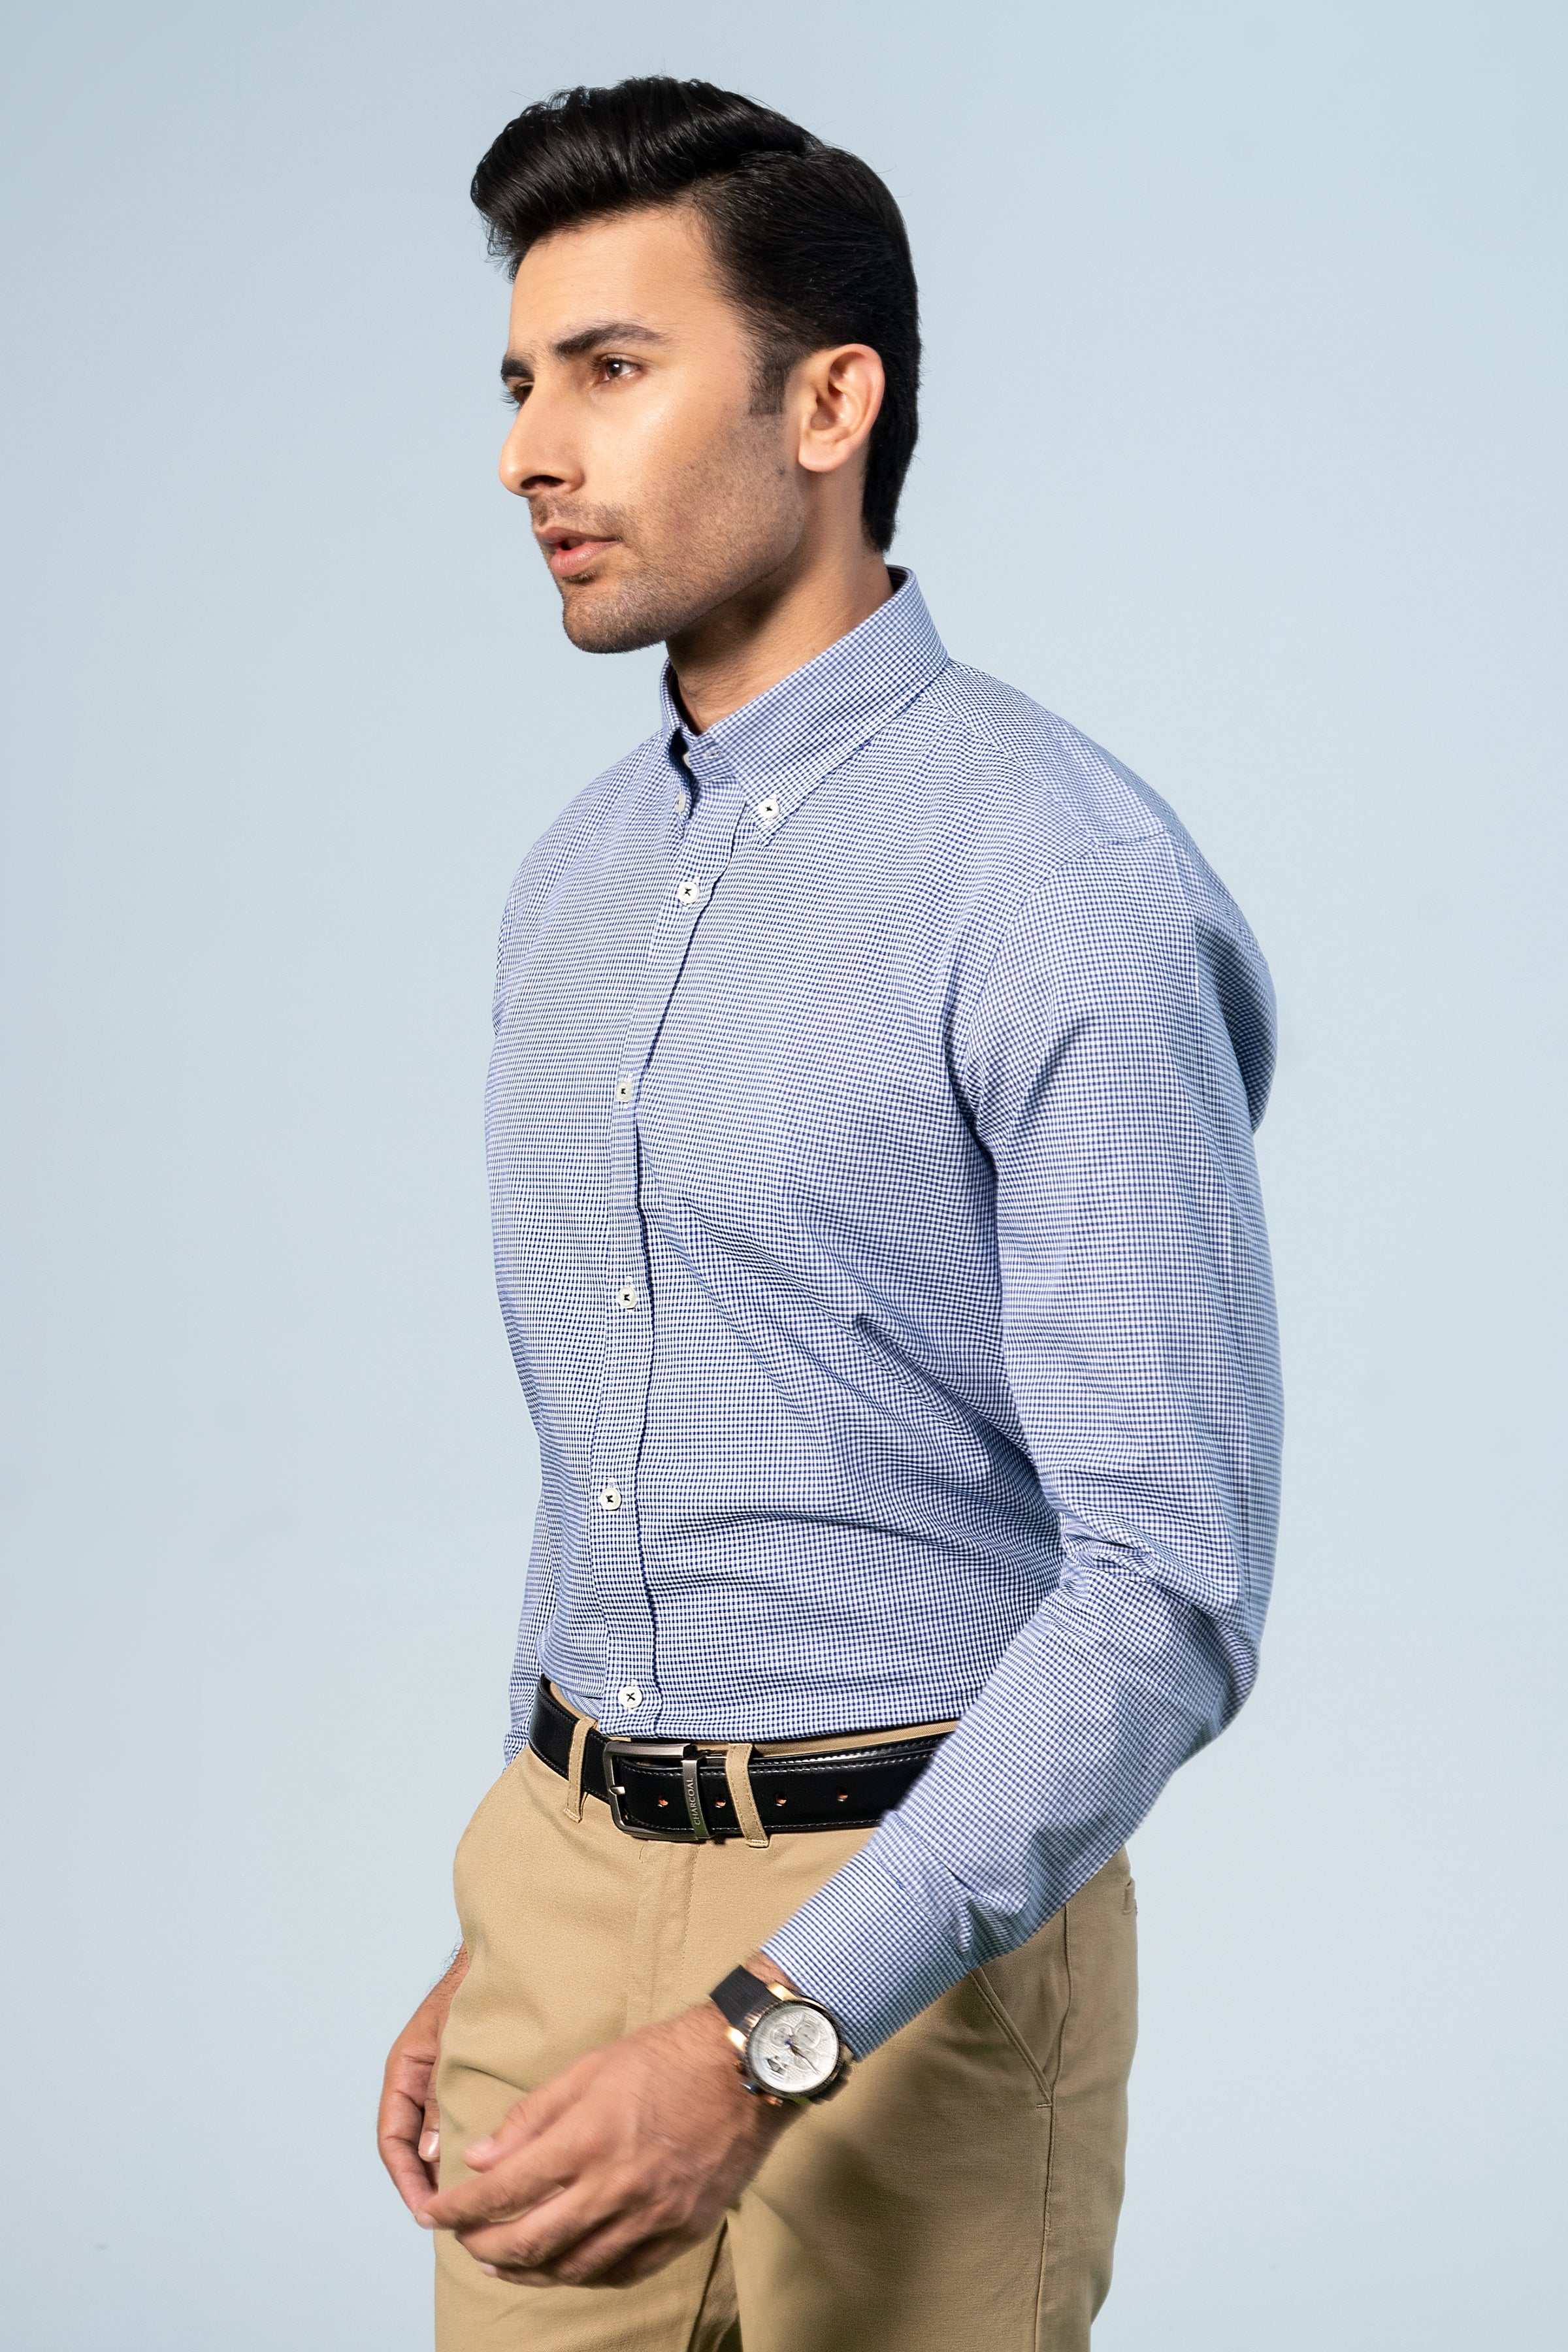 SEMI FORMAL NAVY WHITE - Charcoal Clothing